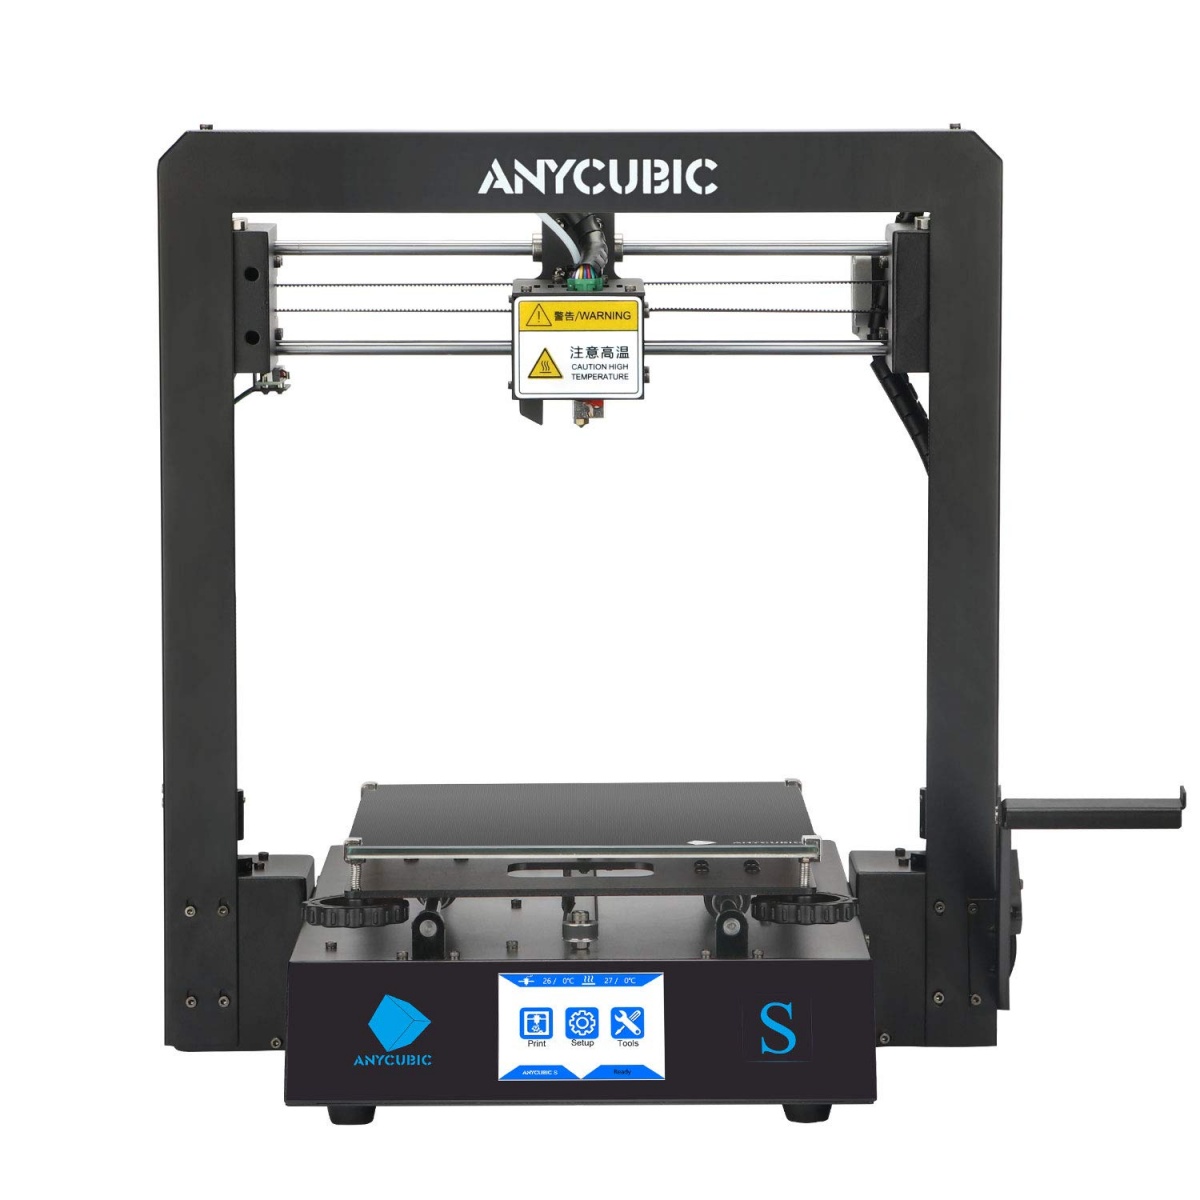 Anycubic Mega S Review